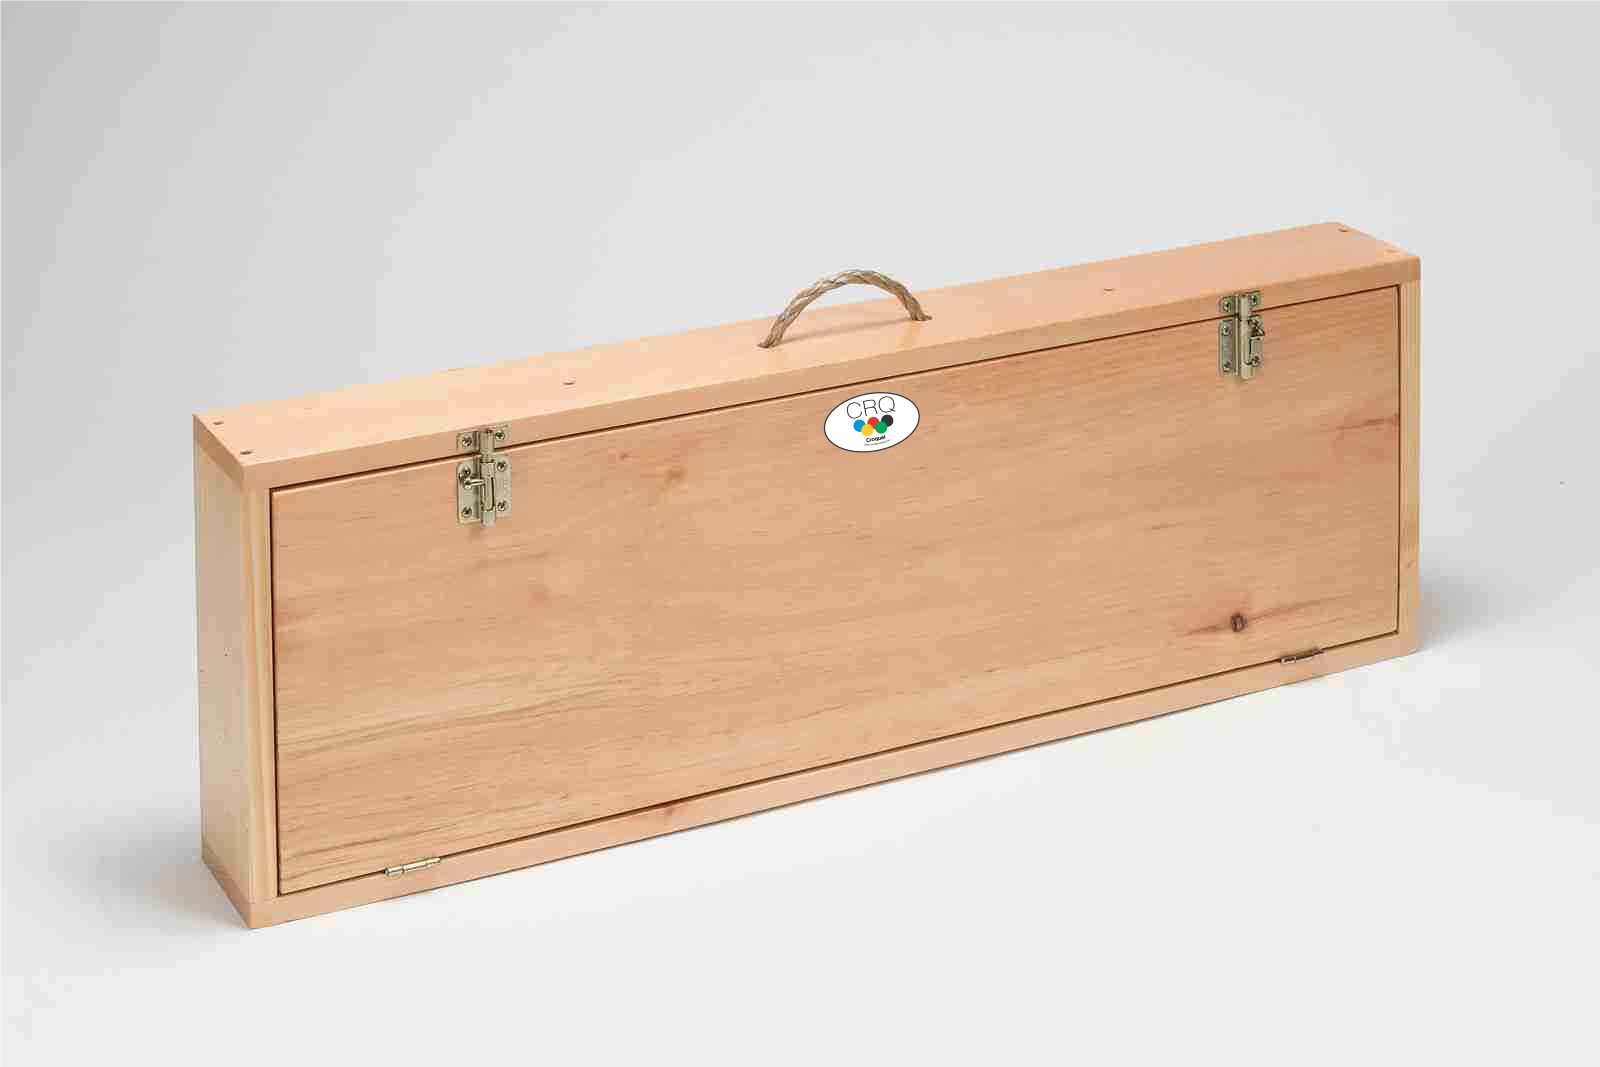 CRQ 119 Croquet Set CRQ Amish Made Classic Deluxe 6 Wicket/4 Player, Wooden Case, 37 inch Mallets Bl/Rd/Blk/Y